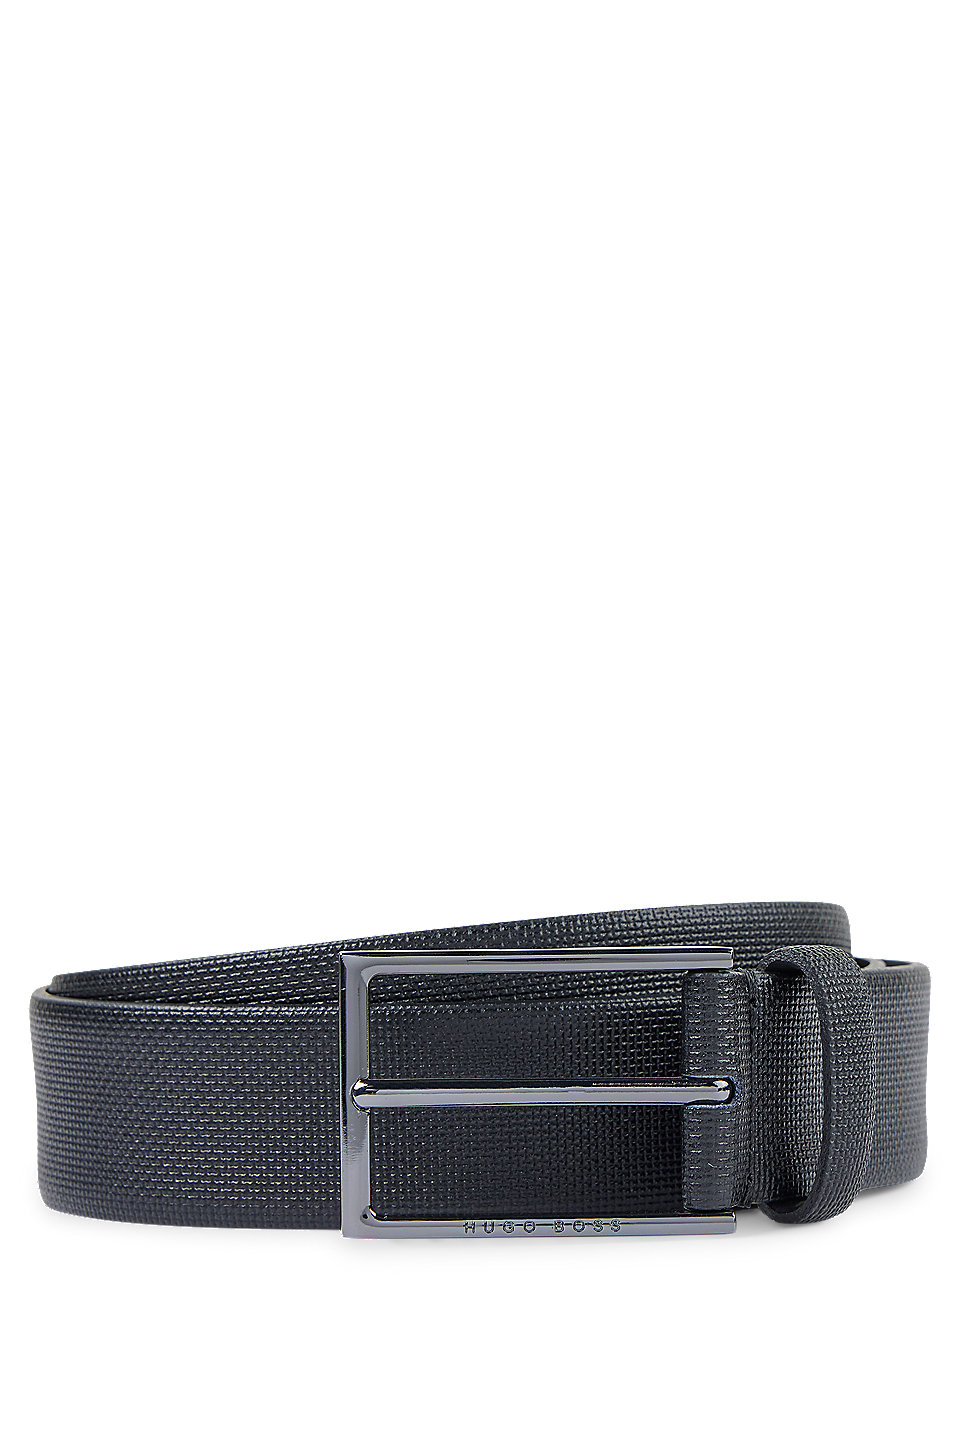 Hugo Boss Label Belt with A Straight End Millow